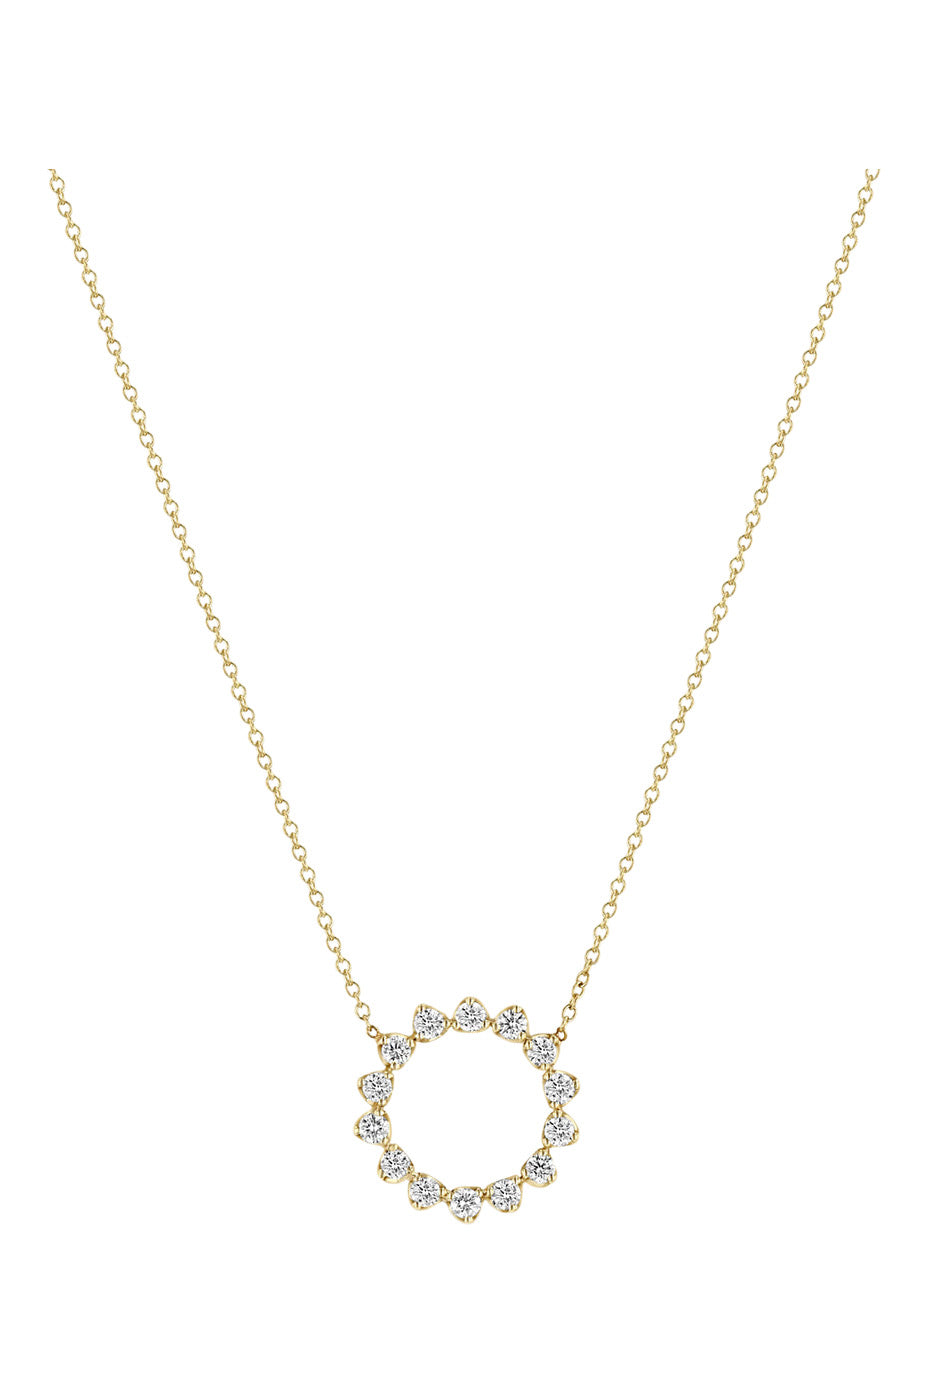 Zoe Chicco Prong Diamond Circle Necklace in 14k Yellow Gold